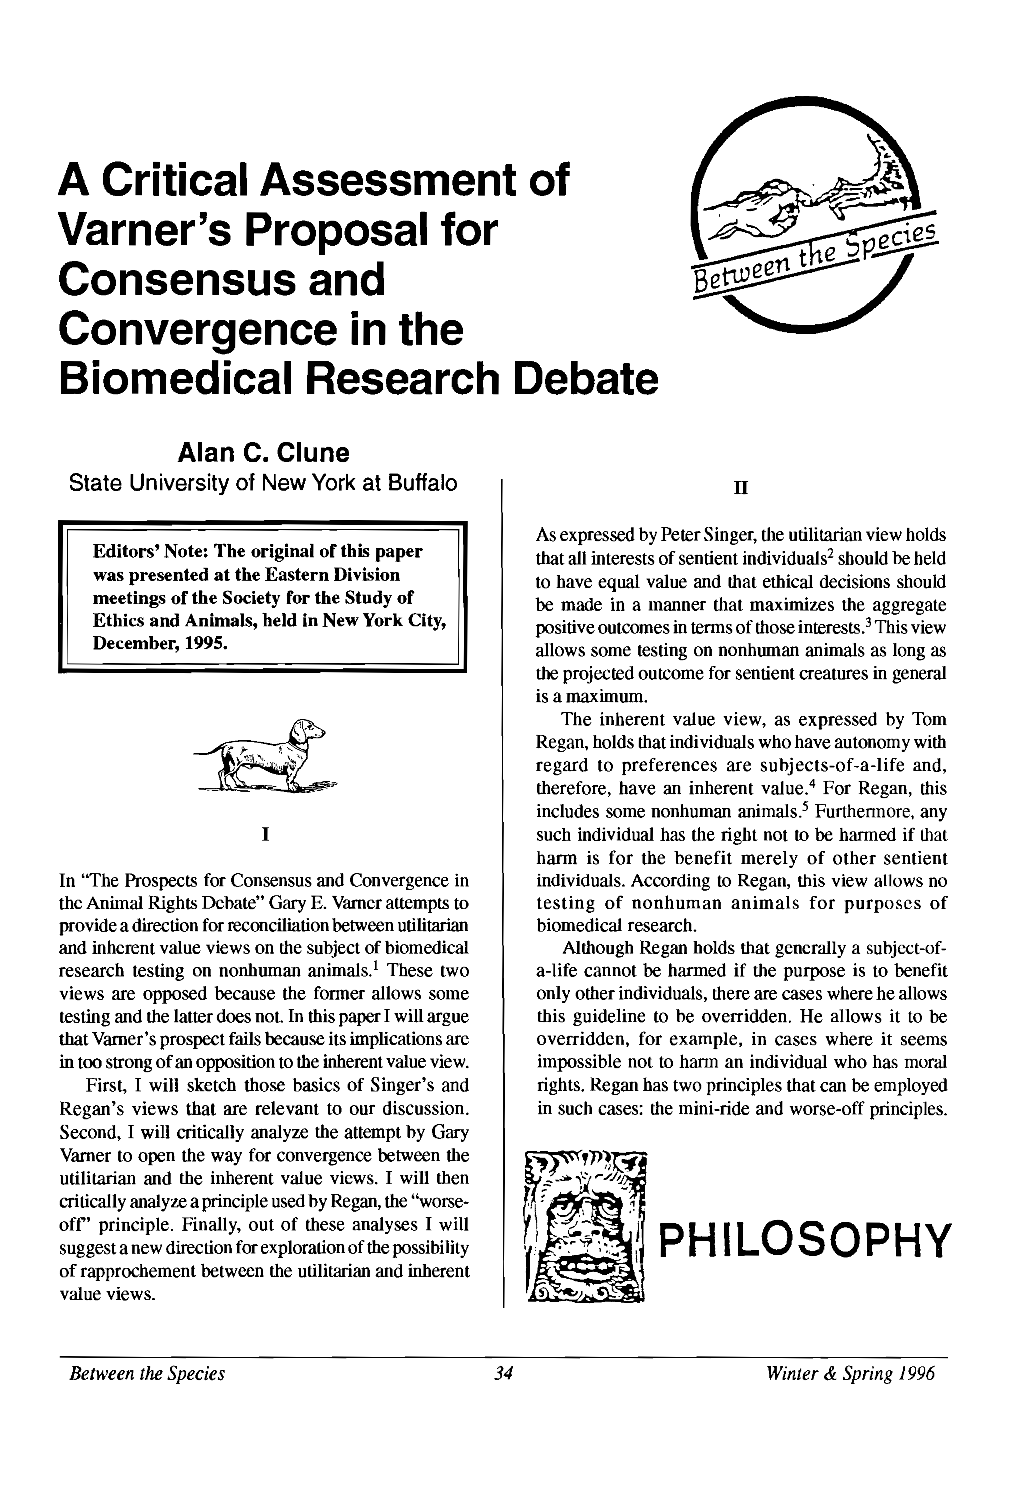 A Critical Assessment of Varner's Proposal for Consensus and Convergenceinthe Biomedical Research Debate